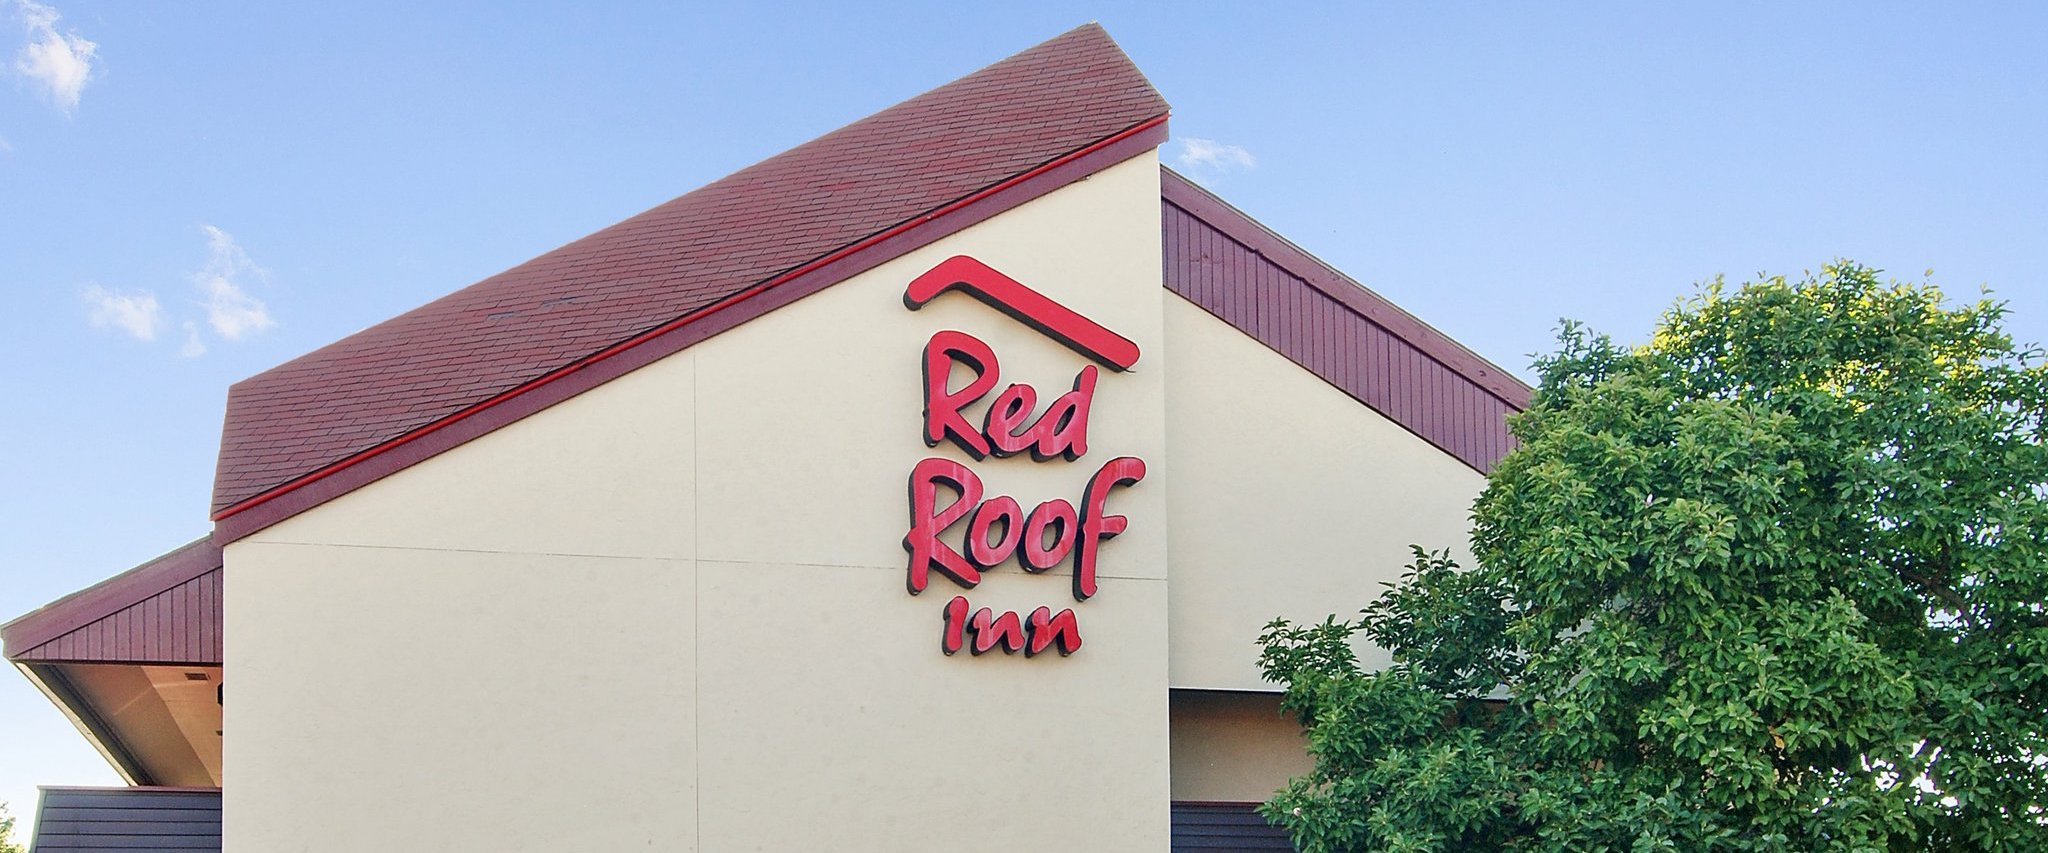 Photo of Red Roof Inn Canton, North Canton, OH